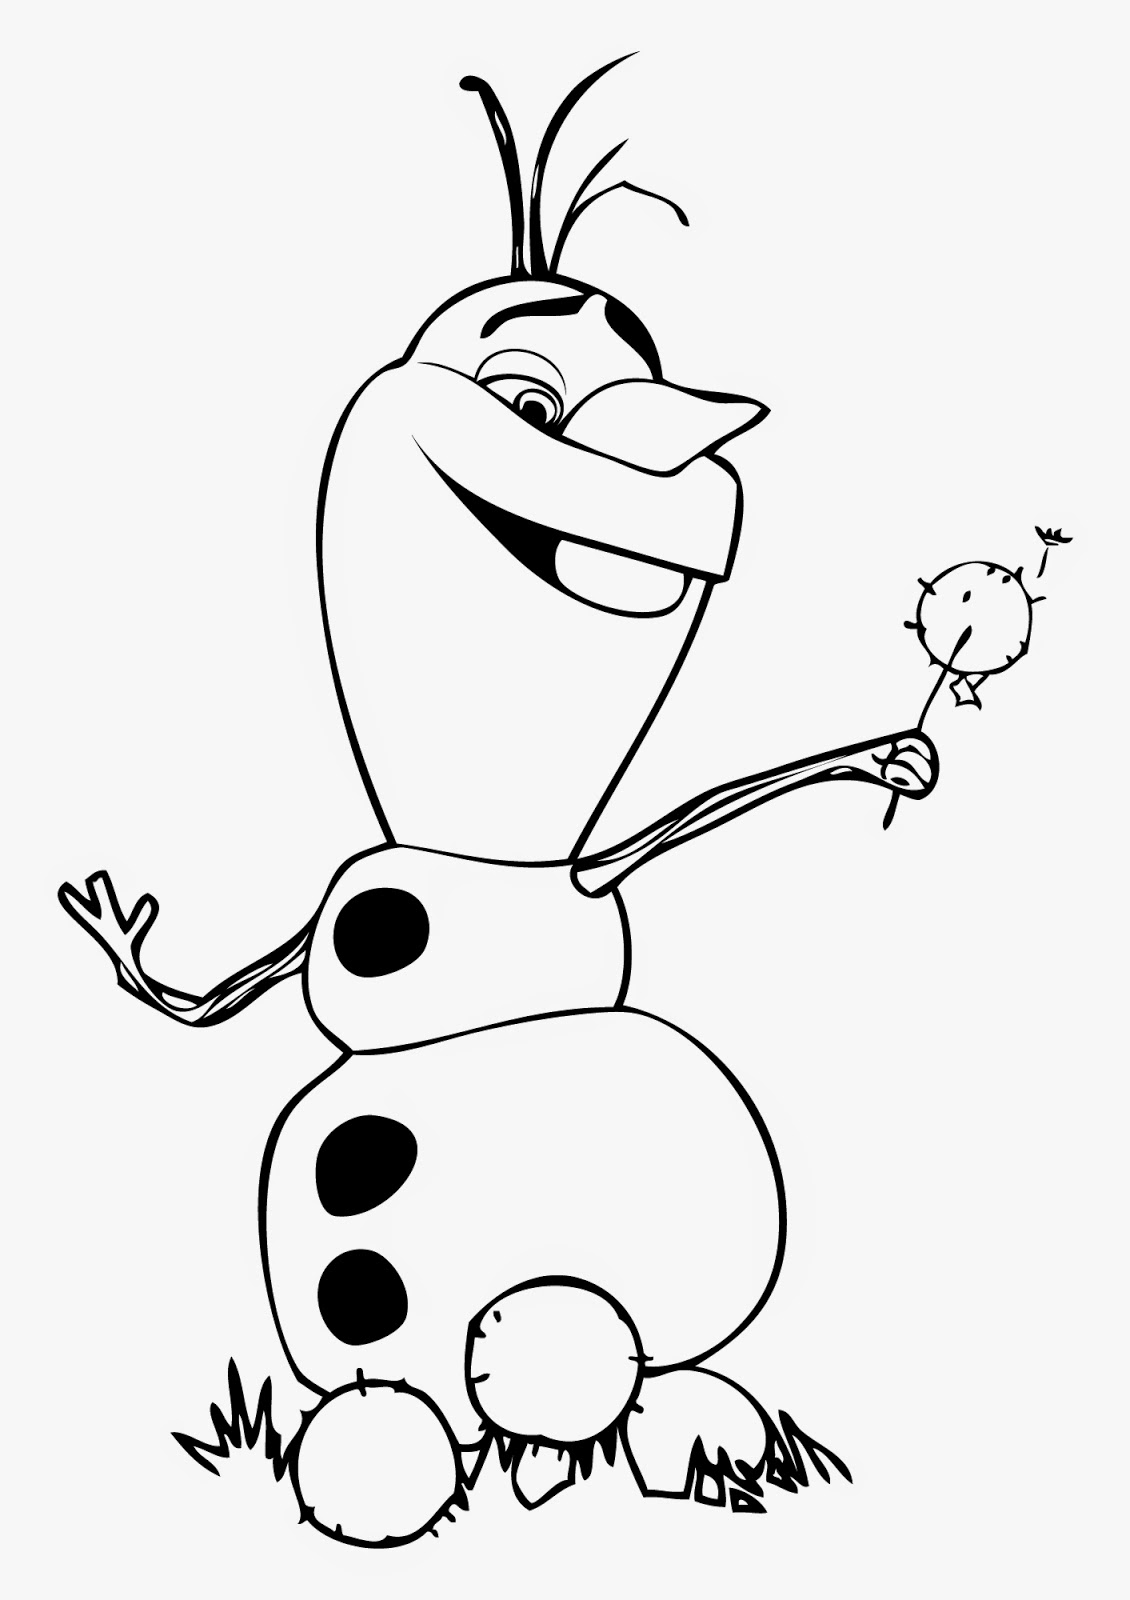 olaf coloring page olafs summer coloring page disney family olaf page coloring 